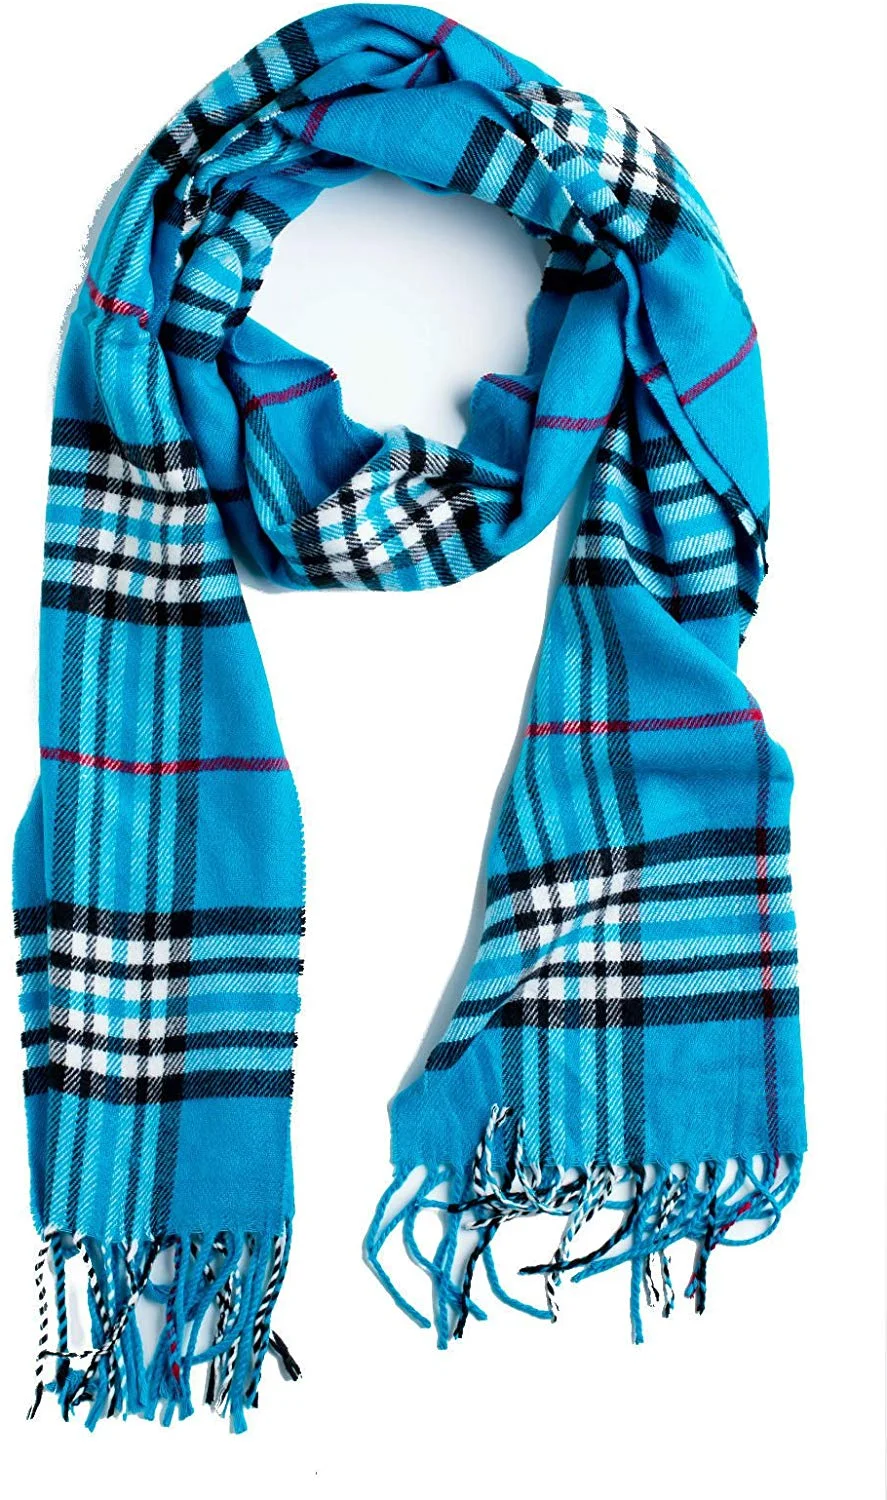 Super Soft Luxurious Cashmere Feel Winter Scarf